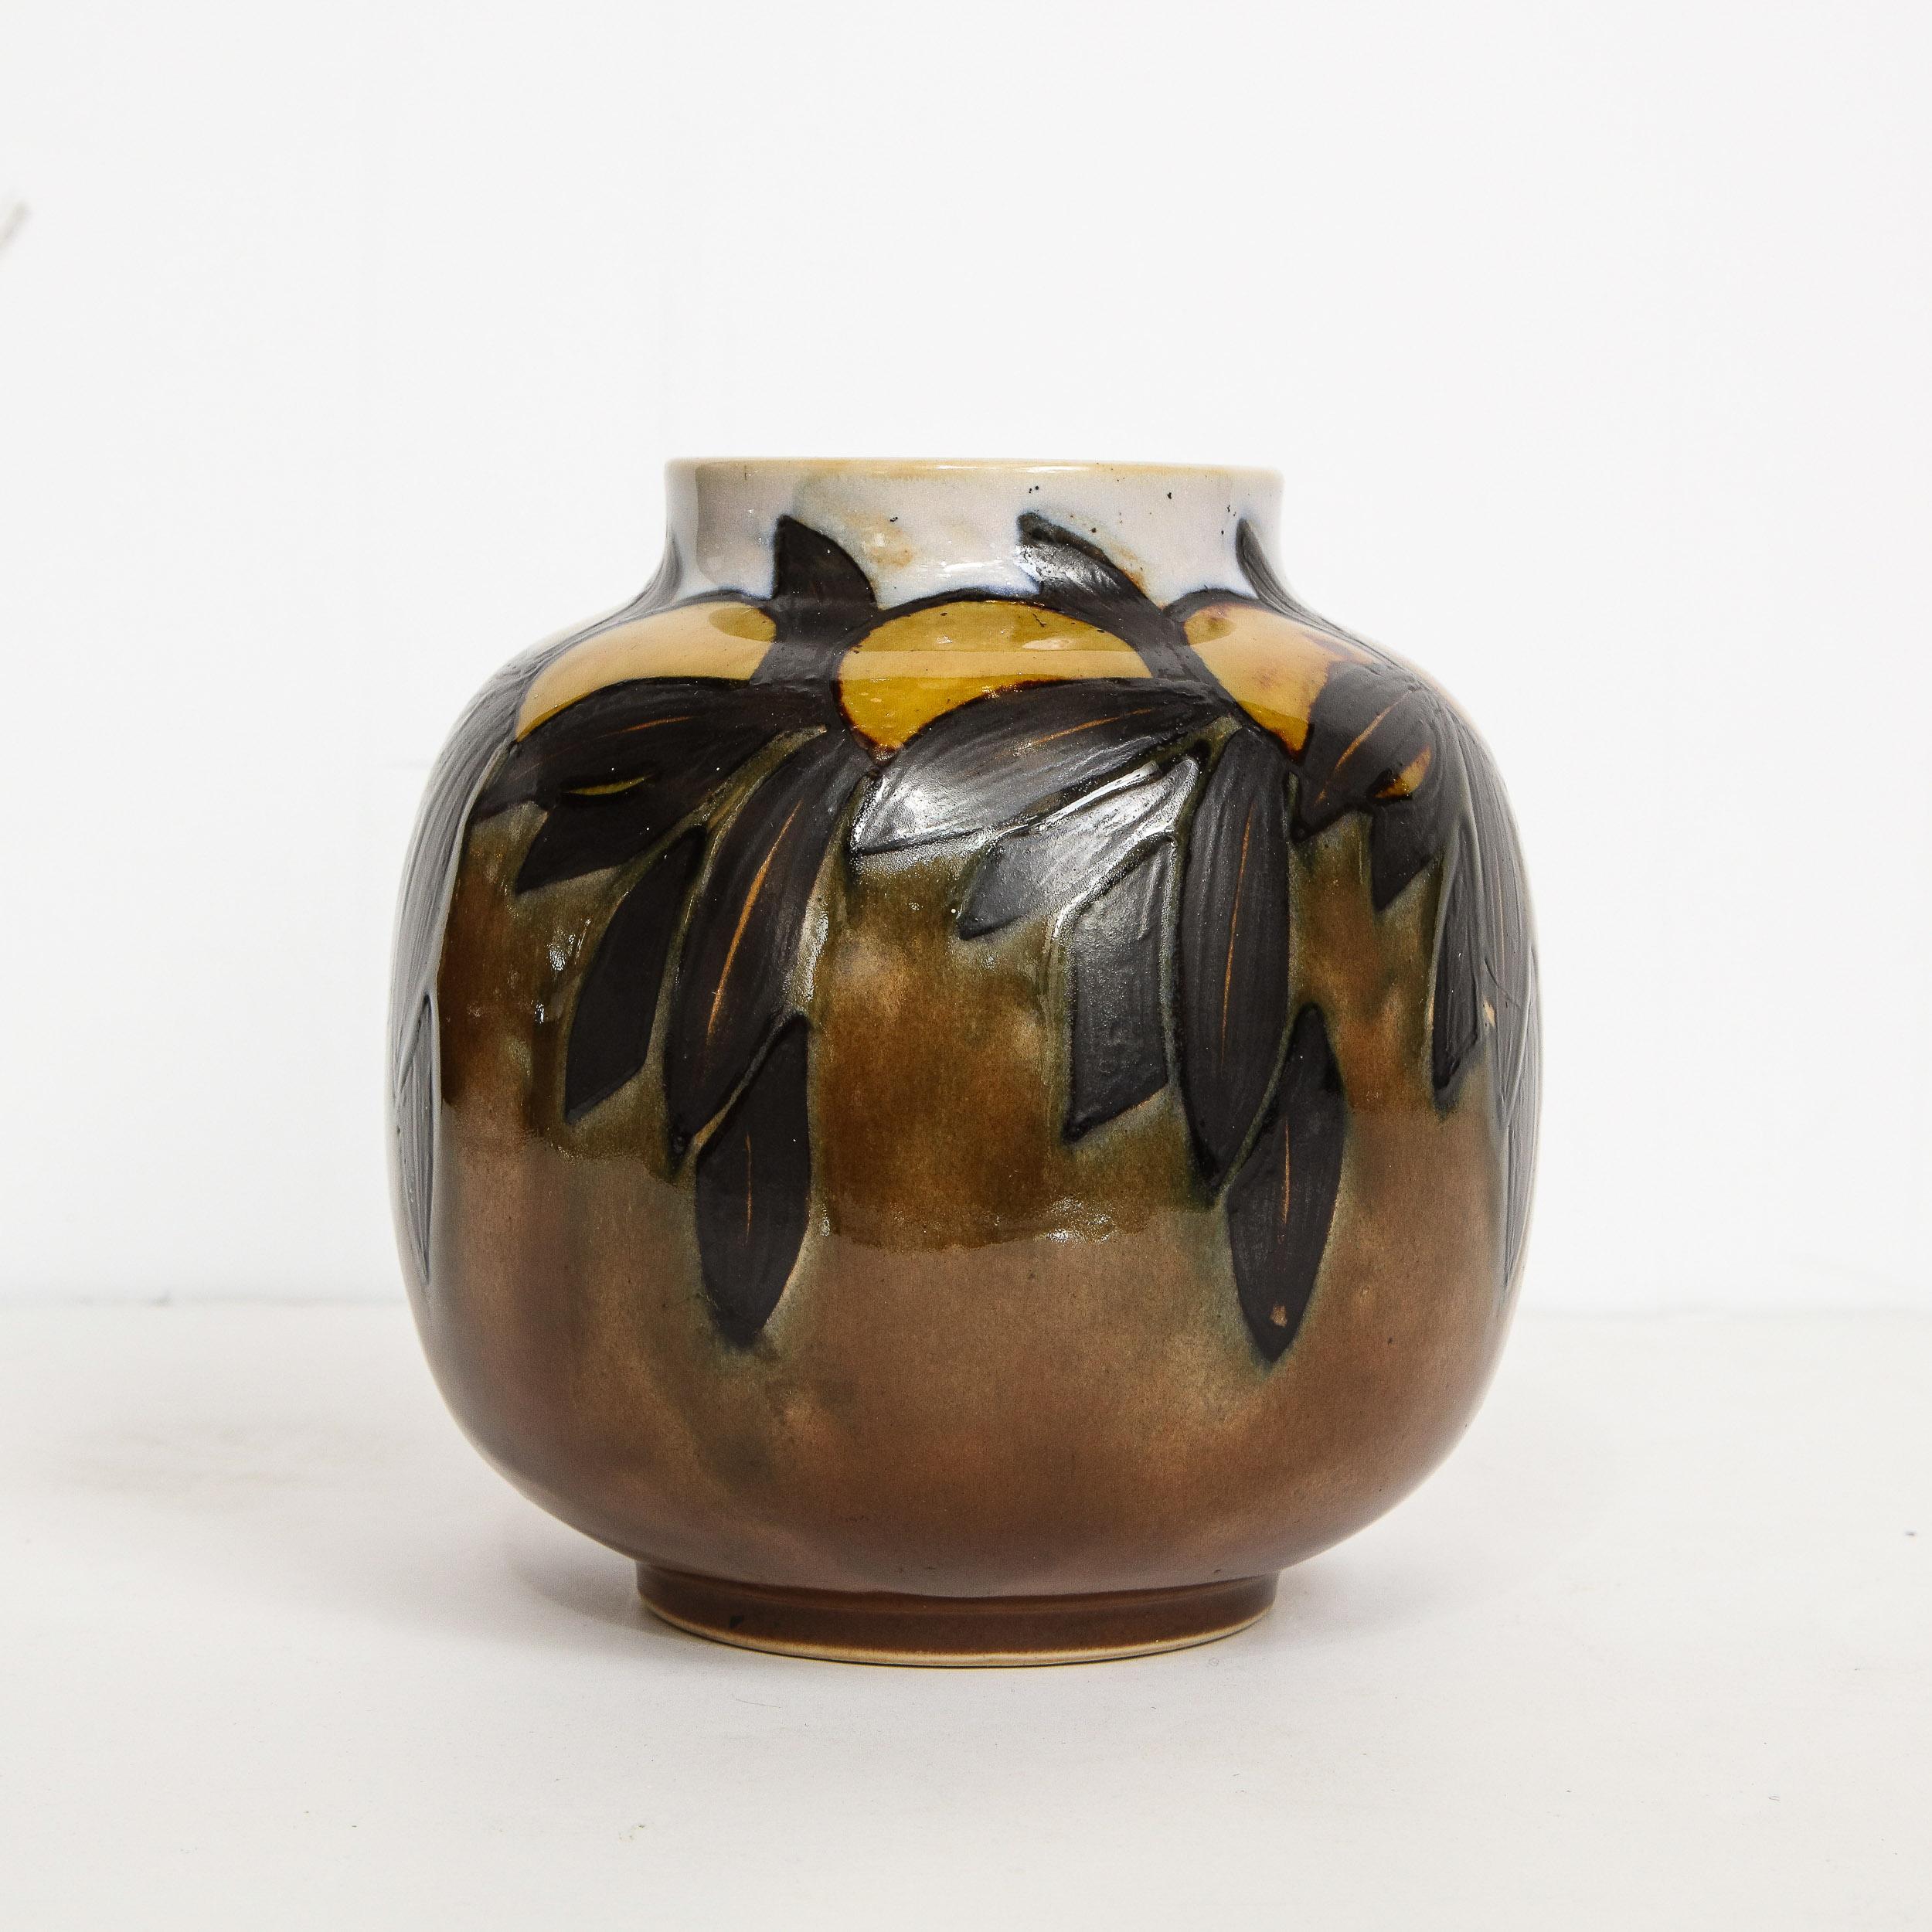 This elegant Art Deco vase was realized by the esteemed British Studio of Royal Doulton, circa 1930. It features a rounded form with a circular neck in glazed ceramic. The piece has been hand painted with a stylized fruit, apparently peaches or